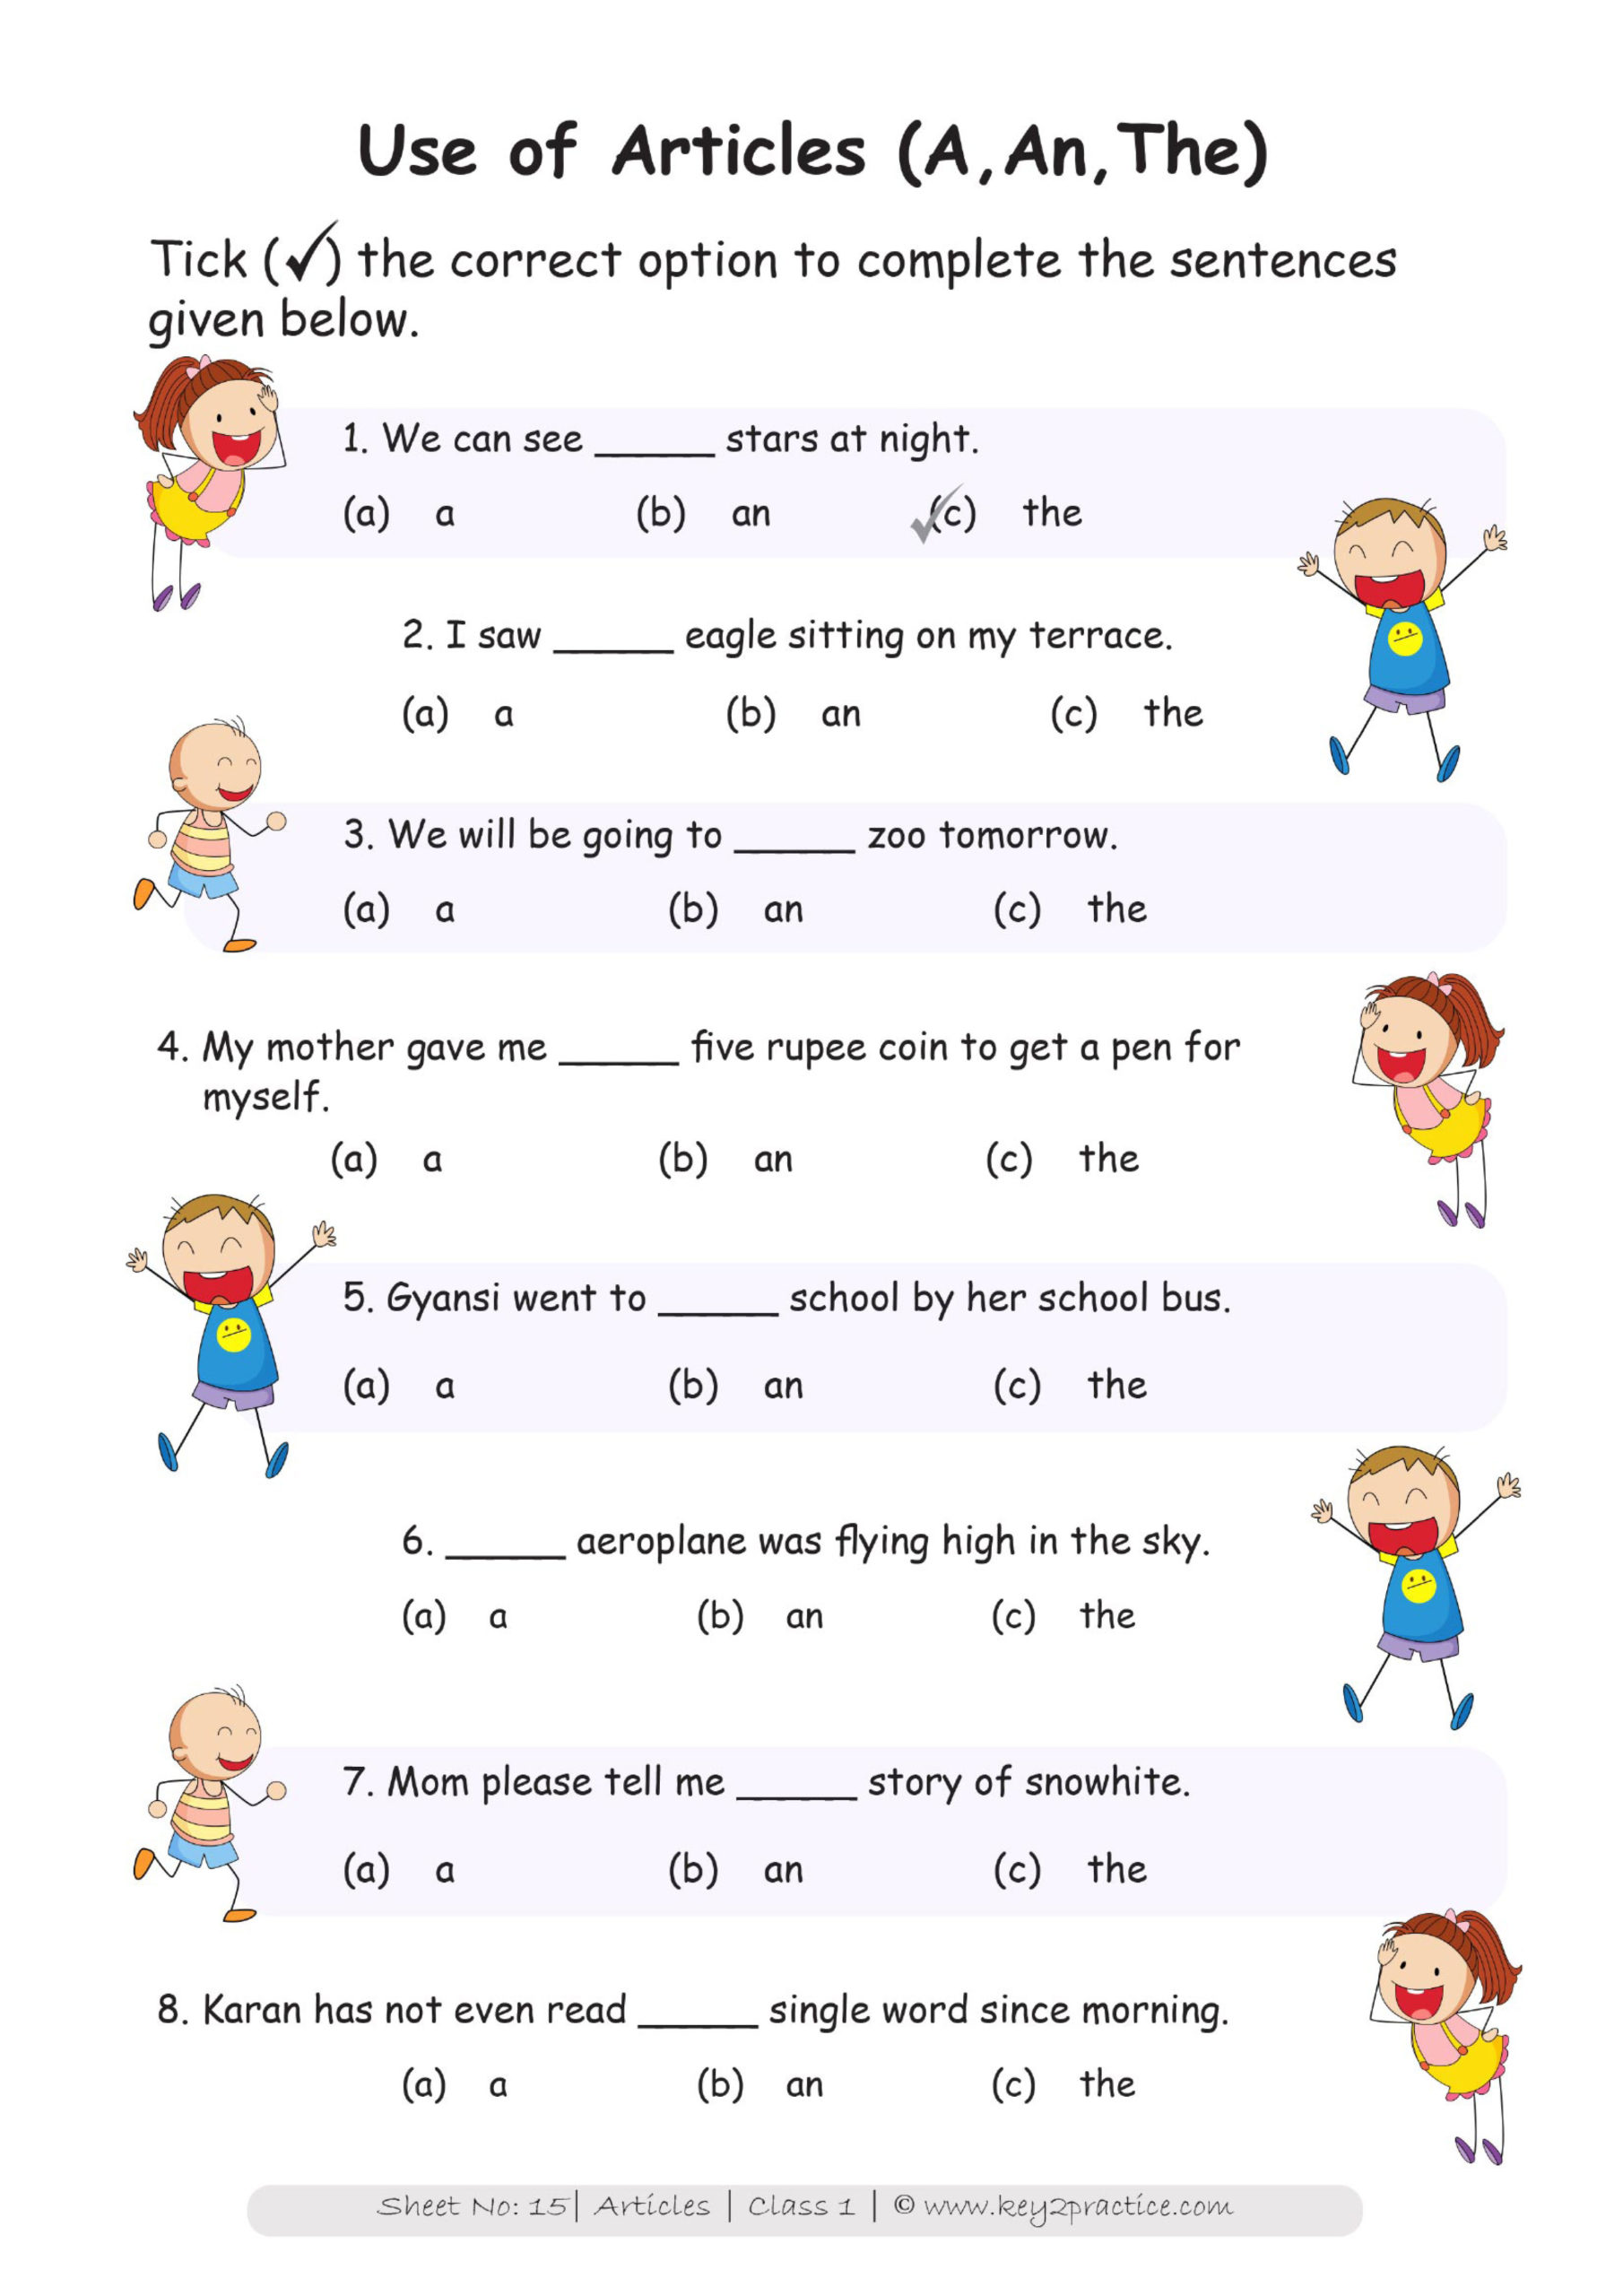 download-cbse-class-1-english-class-test-worksheet-in-pdf-english